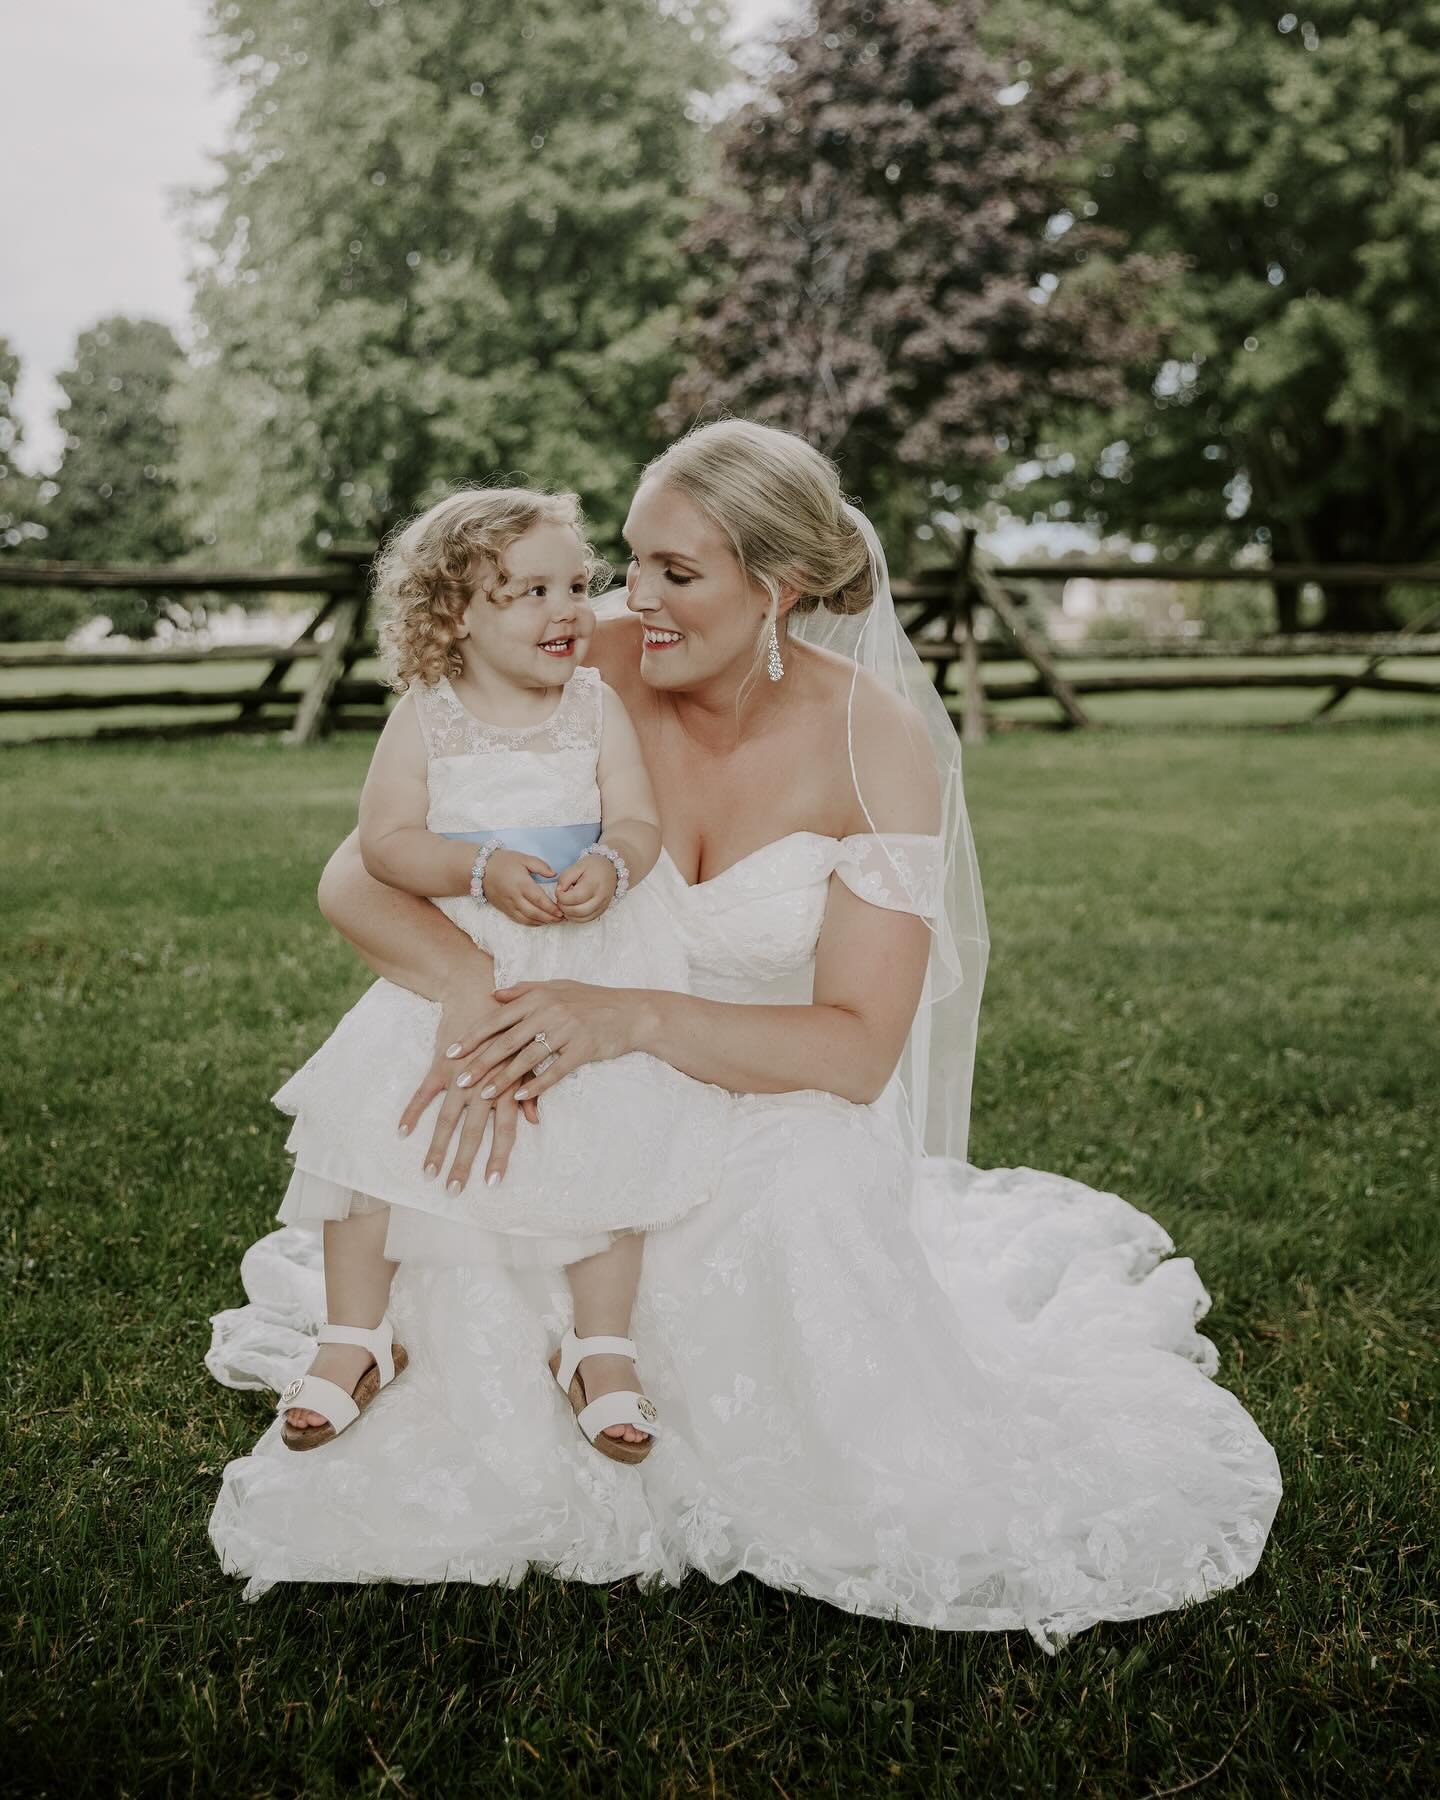 To all the Moms - Happy Mother&rsquo;s Day! 💗

I have the beautiful privilege of documenting Moms in all stages of life; from when they are expecting to freshly postpartum, first time Moms to seasoned Moms, Mother of the brides or the bride who is a